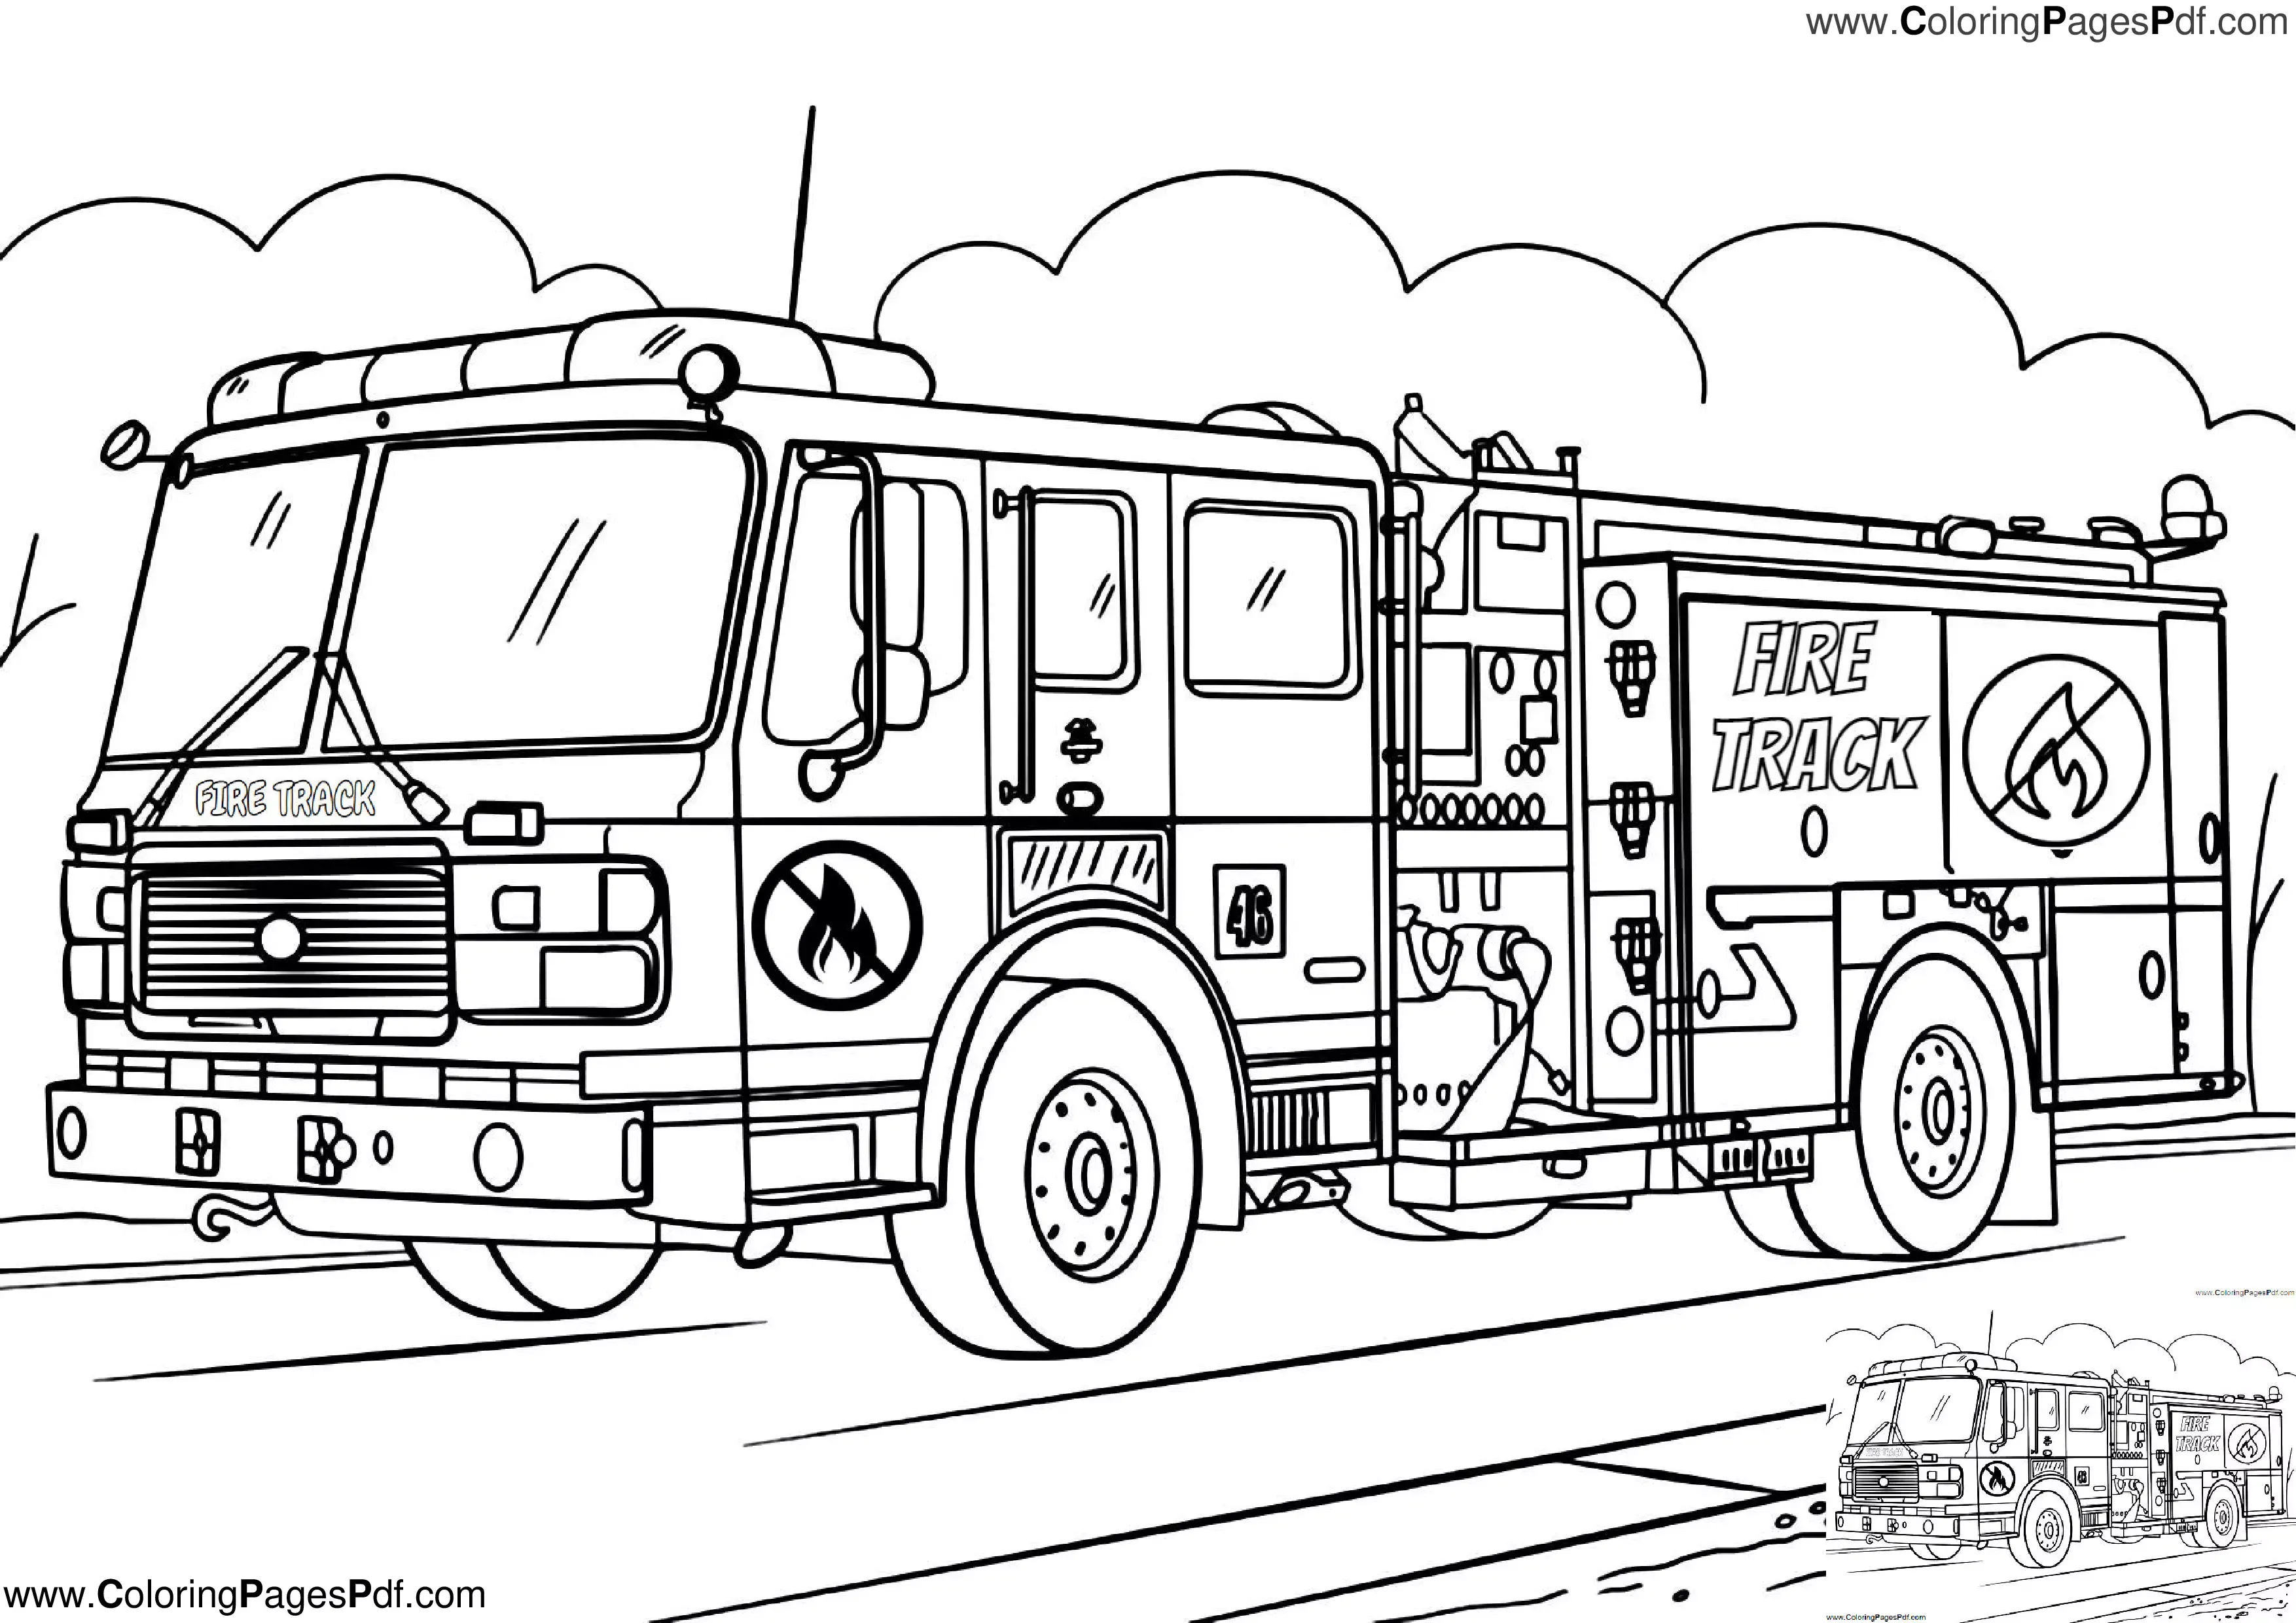 Fire truck coloring page pdf